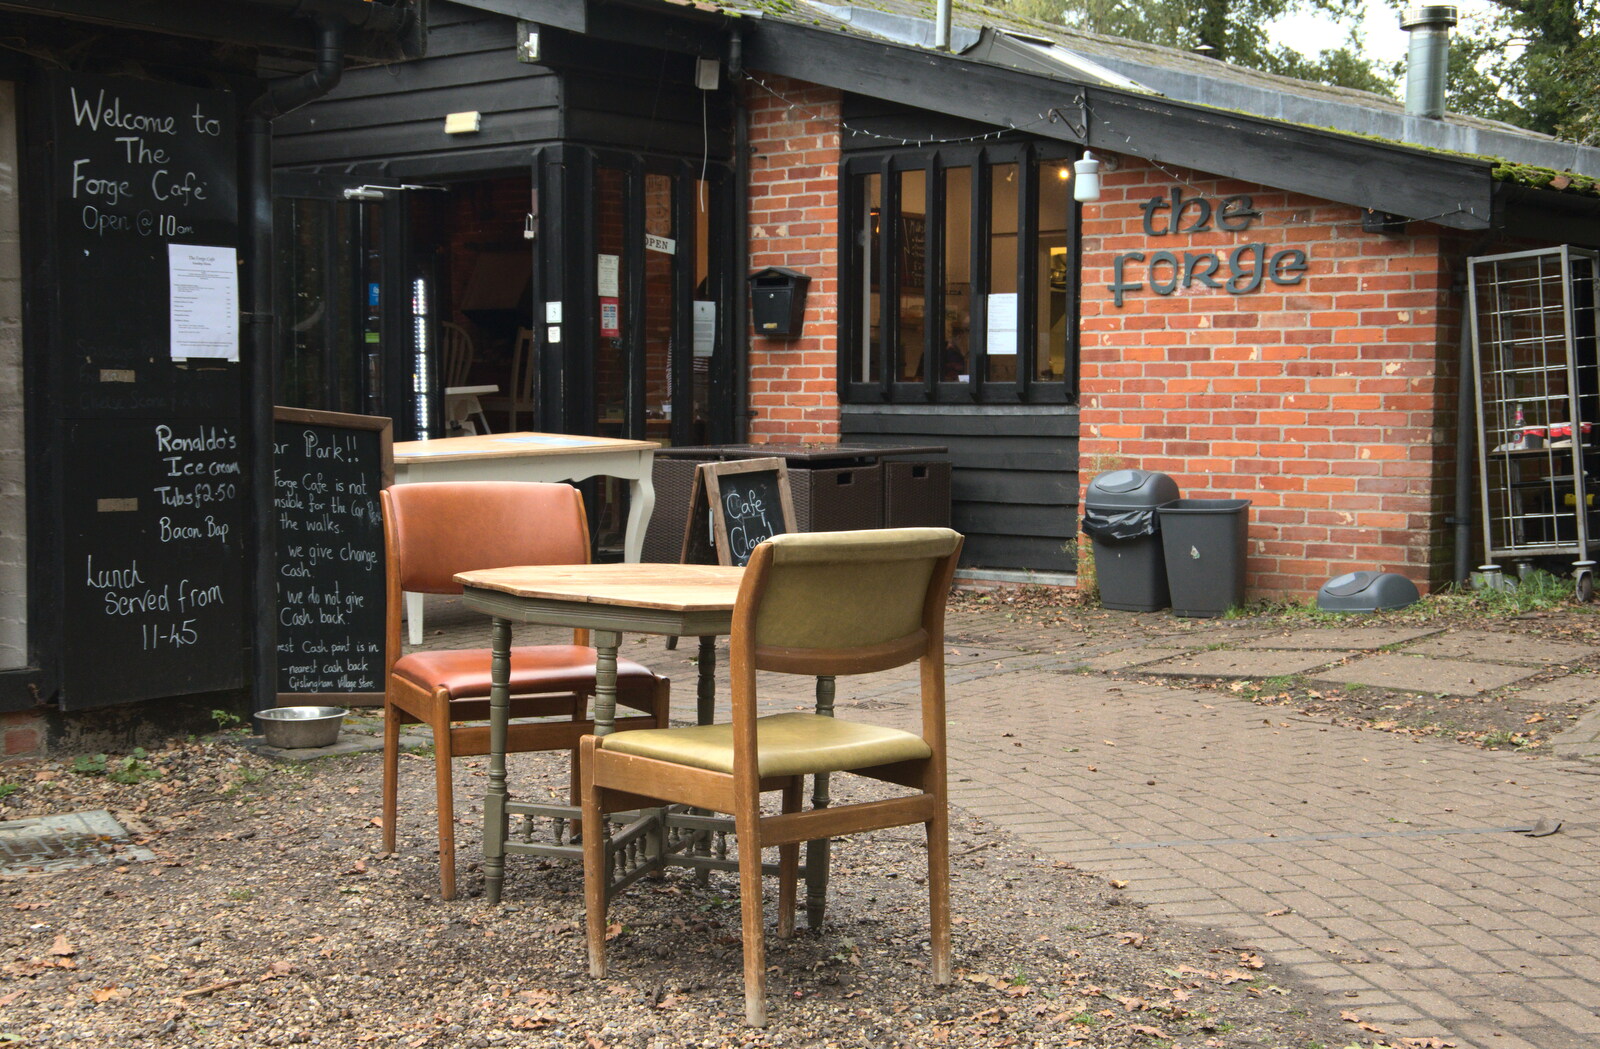 The Forge Café has moved its furniture outside from A Walk Around Thornham Estate, Thornham Magna, Suffolk - 18th October 2020